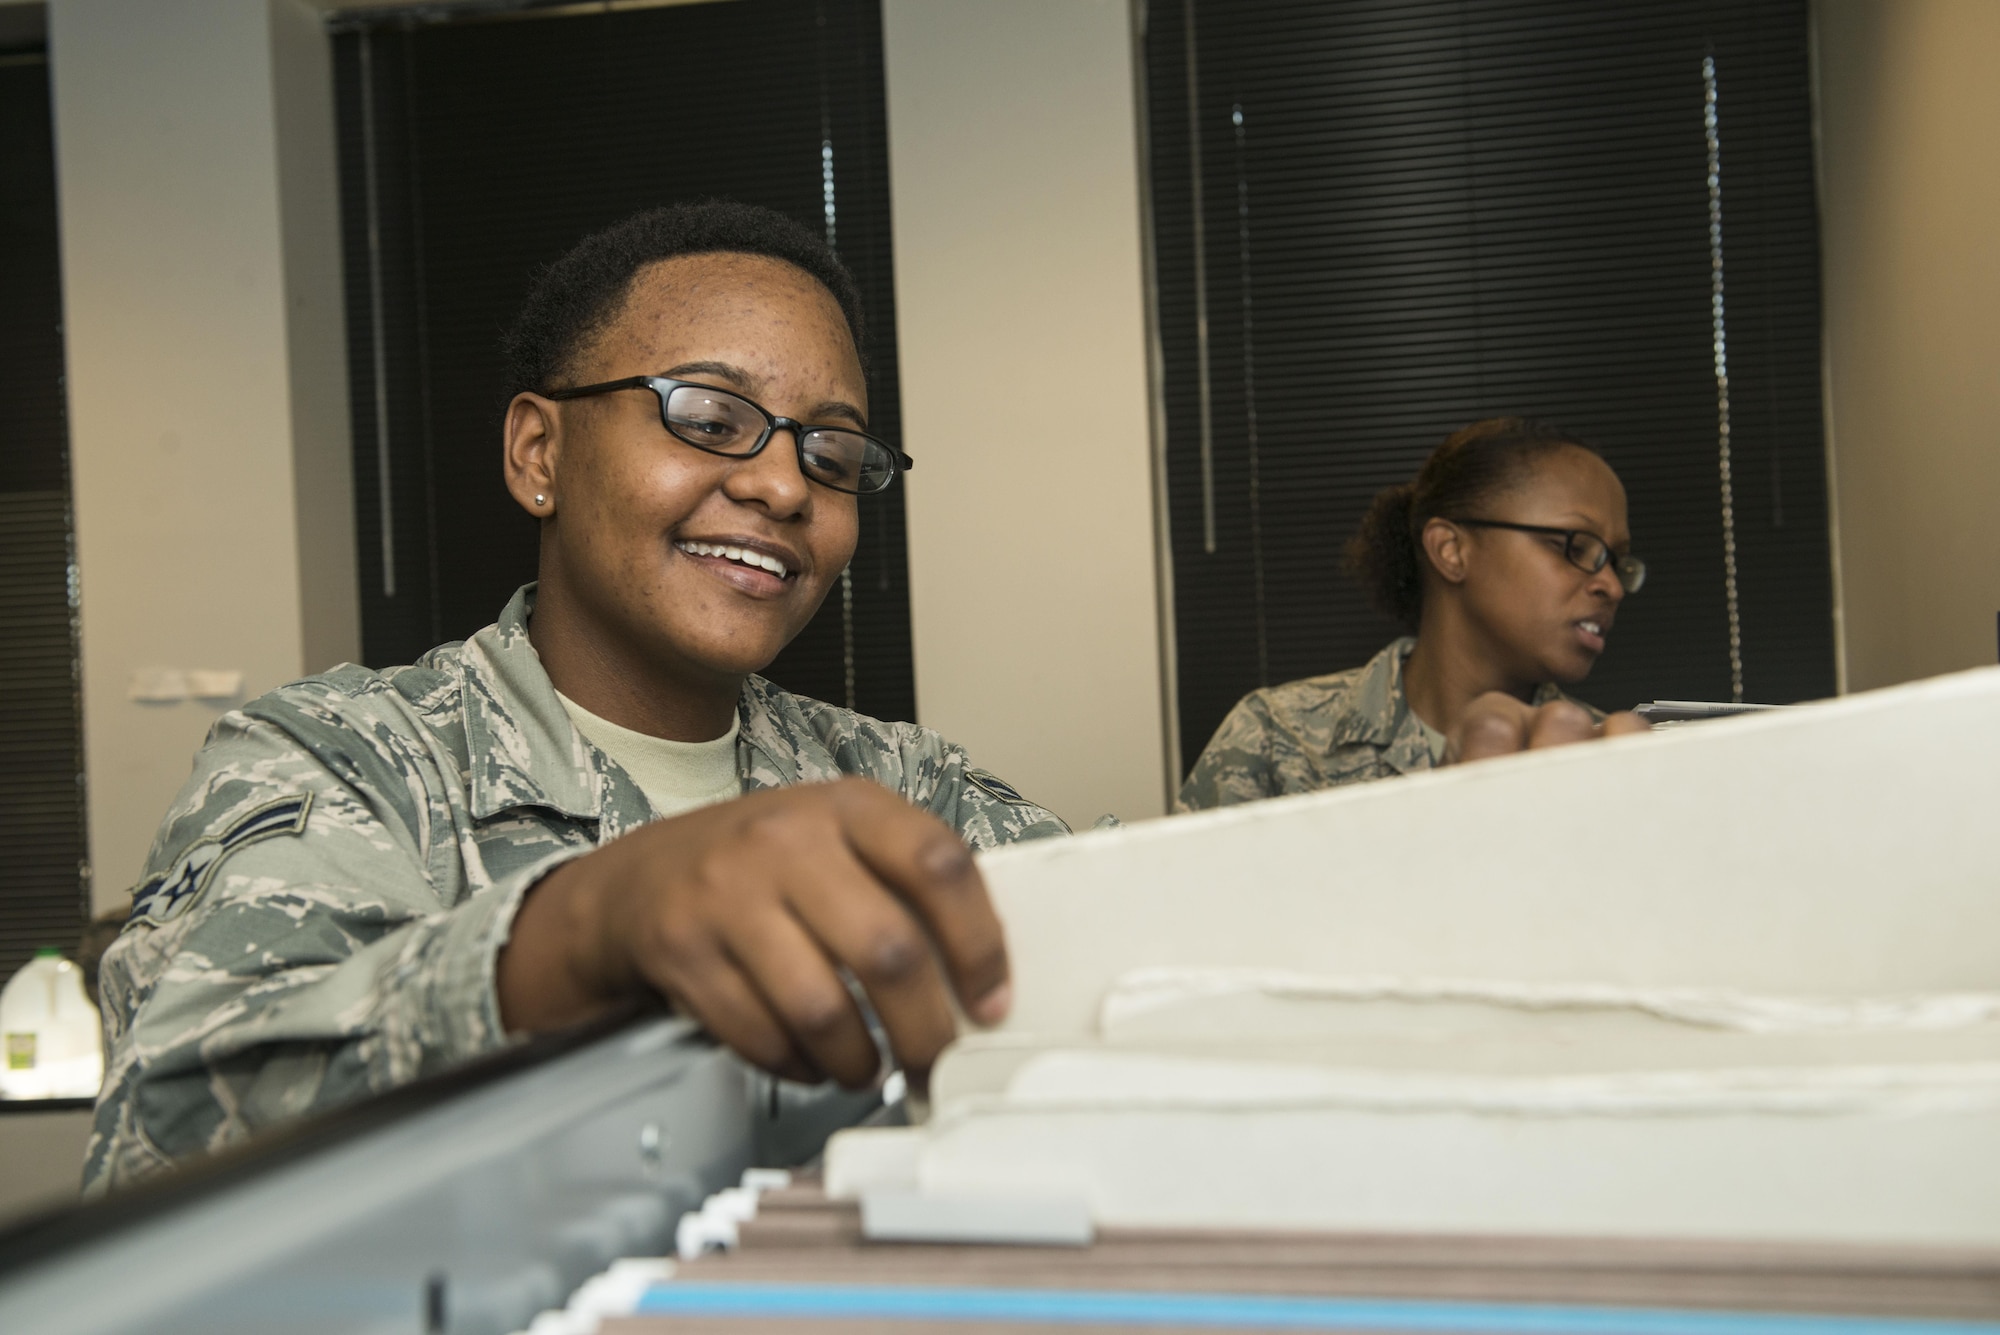 U.S. Air Force Airman 1st Class Lakeia Garner, 20th Force Support Squadron (FSS) outbound assignments personnel specialist, reviews folders while Staff Sgt. Jasmine Turner, 20th FSS career development supervisor, marks off names at Shaw Air Force Base, South Carolina, Nov. 13, 2017.